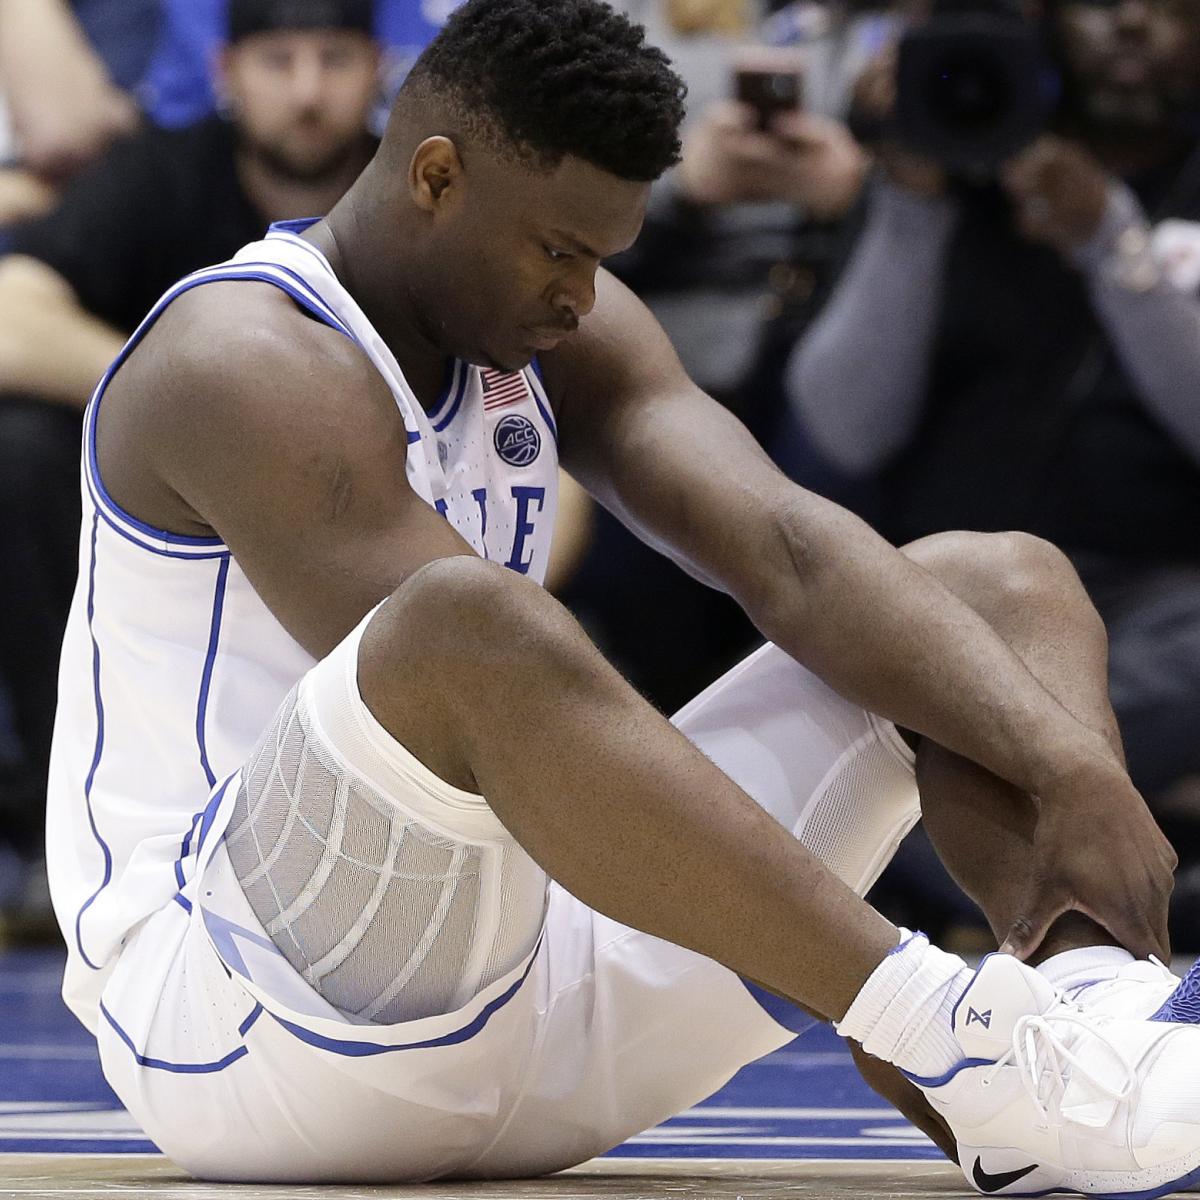 Skechers Takes Shots at Nike for Zion Williamson's Ripped Shoe with IG, NYT Ads ...